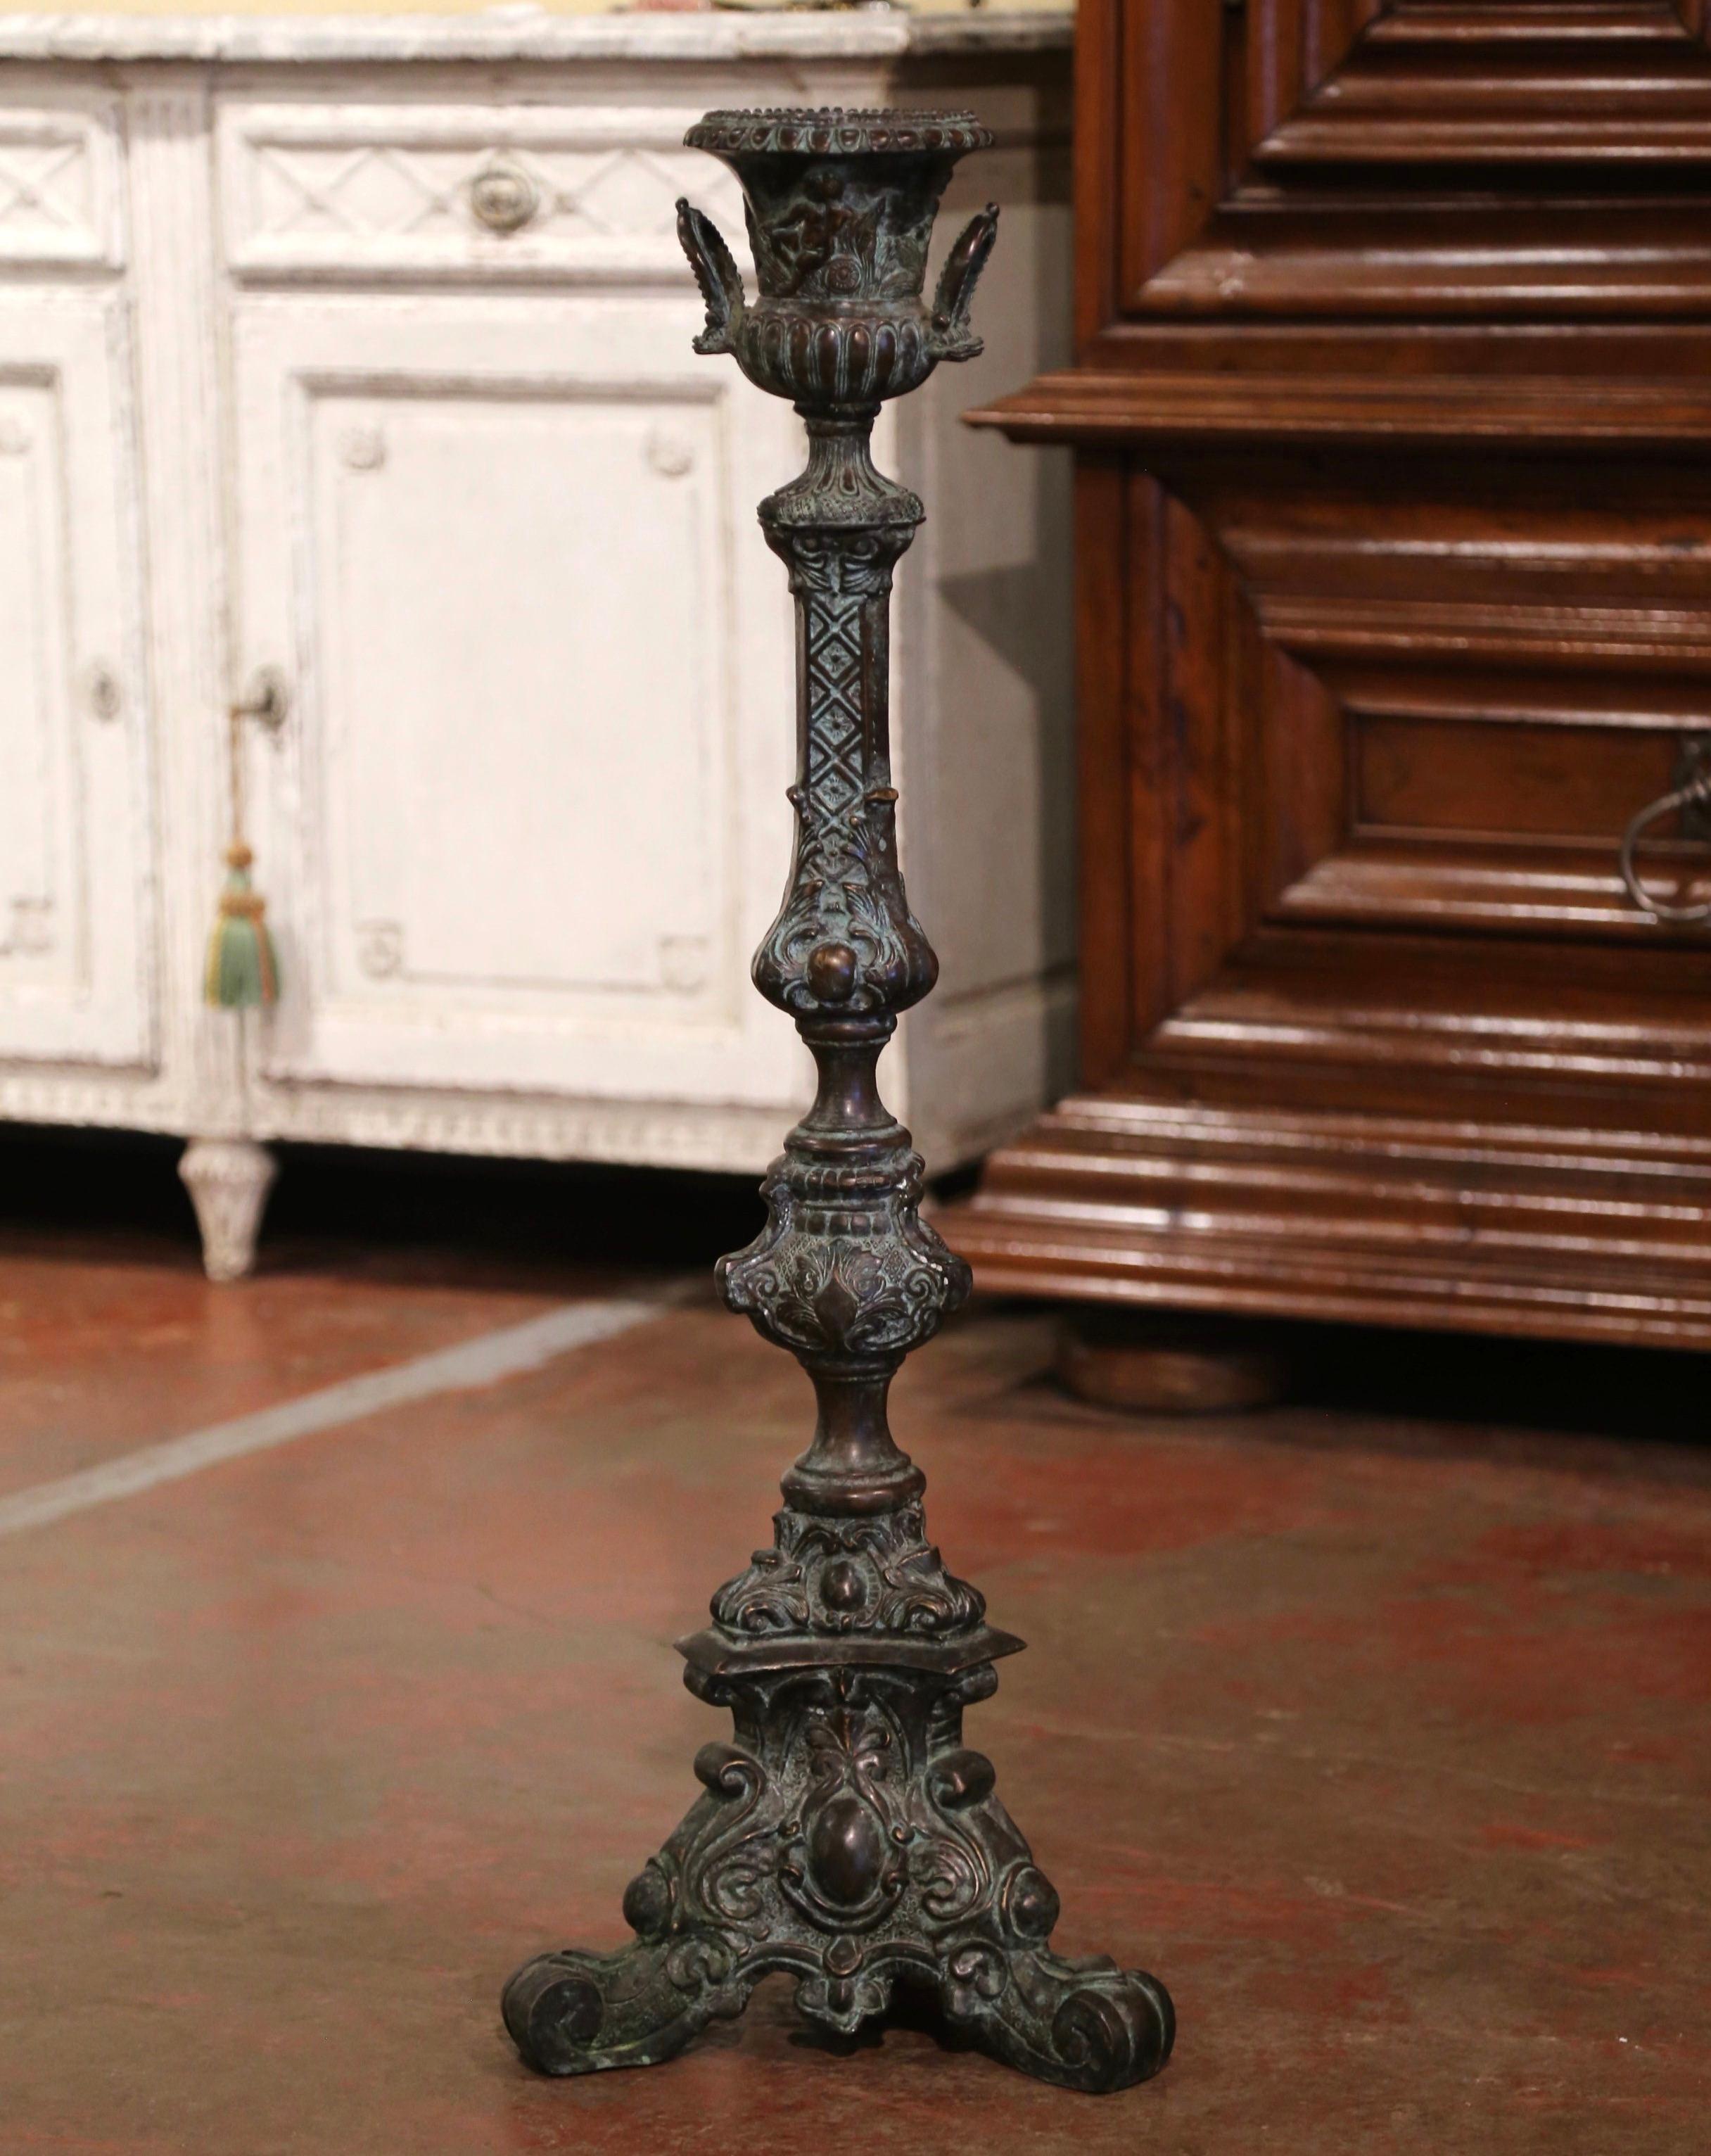 Crafted in France circa 1950 and made of solid bronze, the vintage candle holder stands on a triangular base ending with scrolled feet. The stem is decorated with intricate motifs including Fleur-de-Lis and acanthus leaves. The top is dressed with